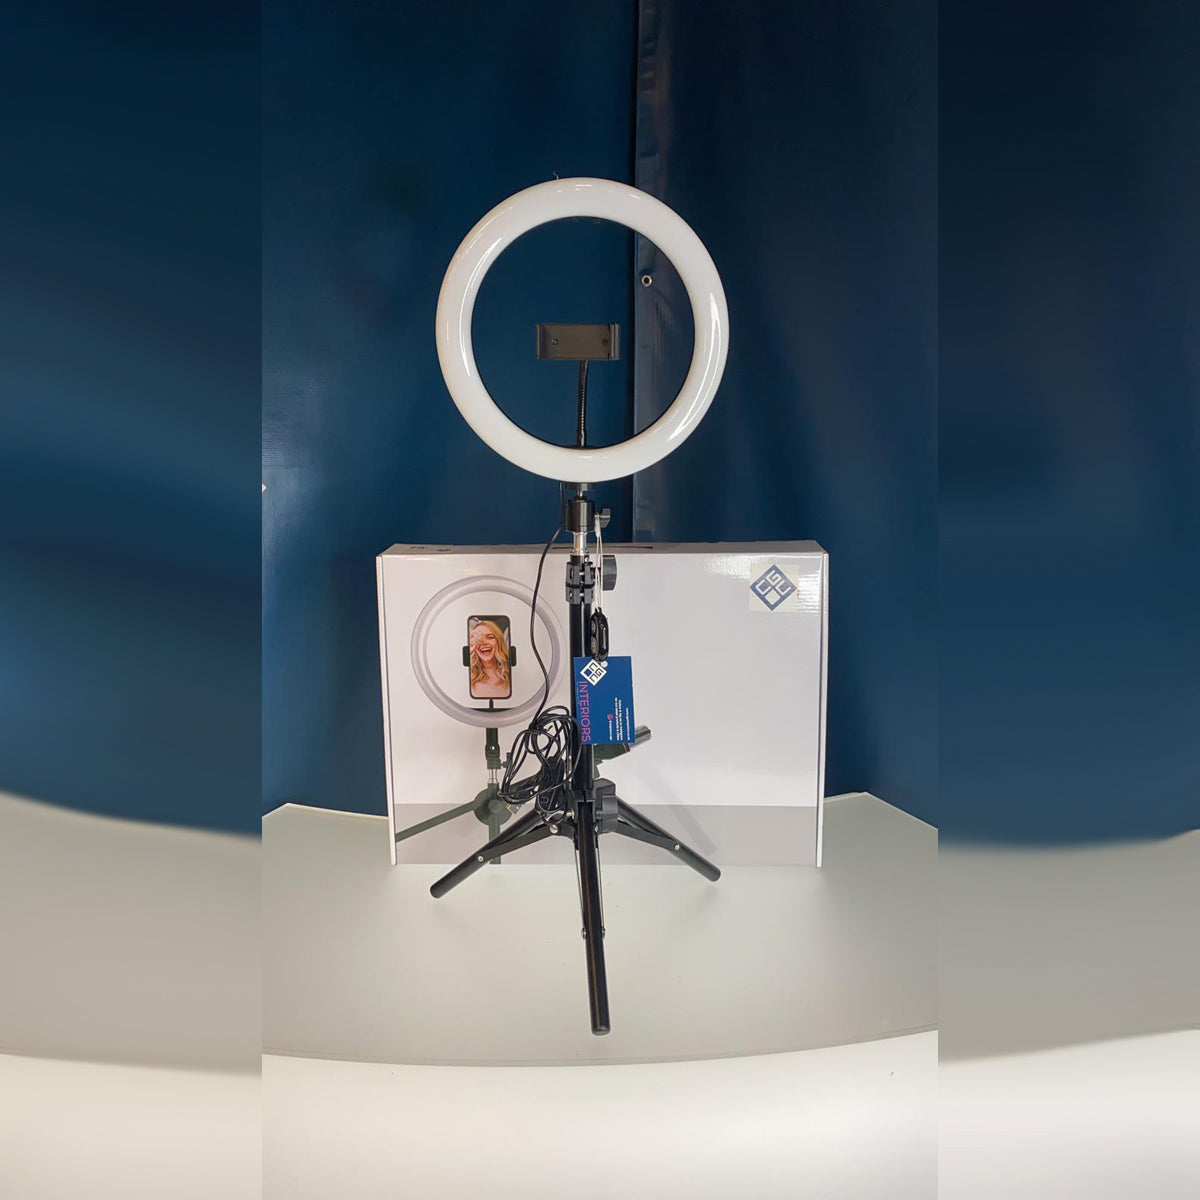 RINGO - CGC 10 Inch LED Table Extendable Ring Light